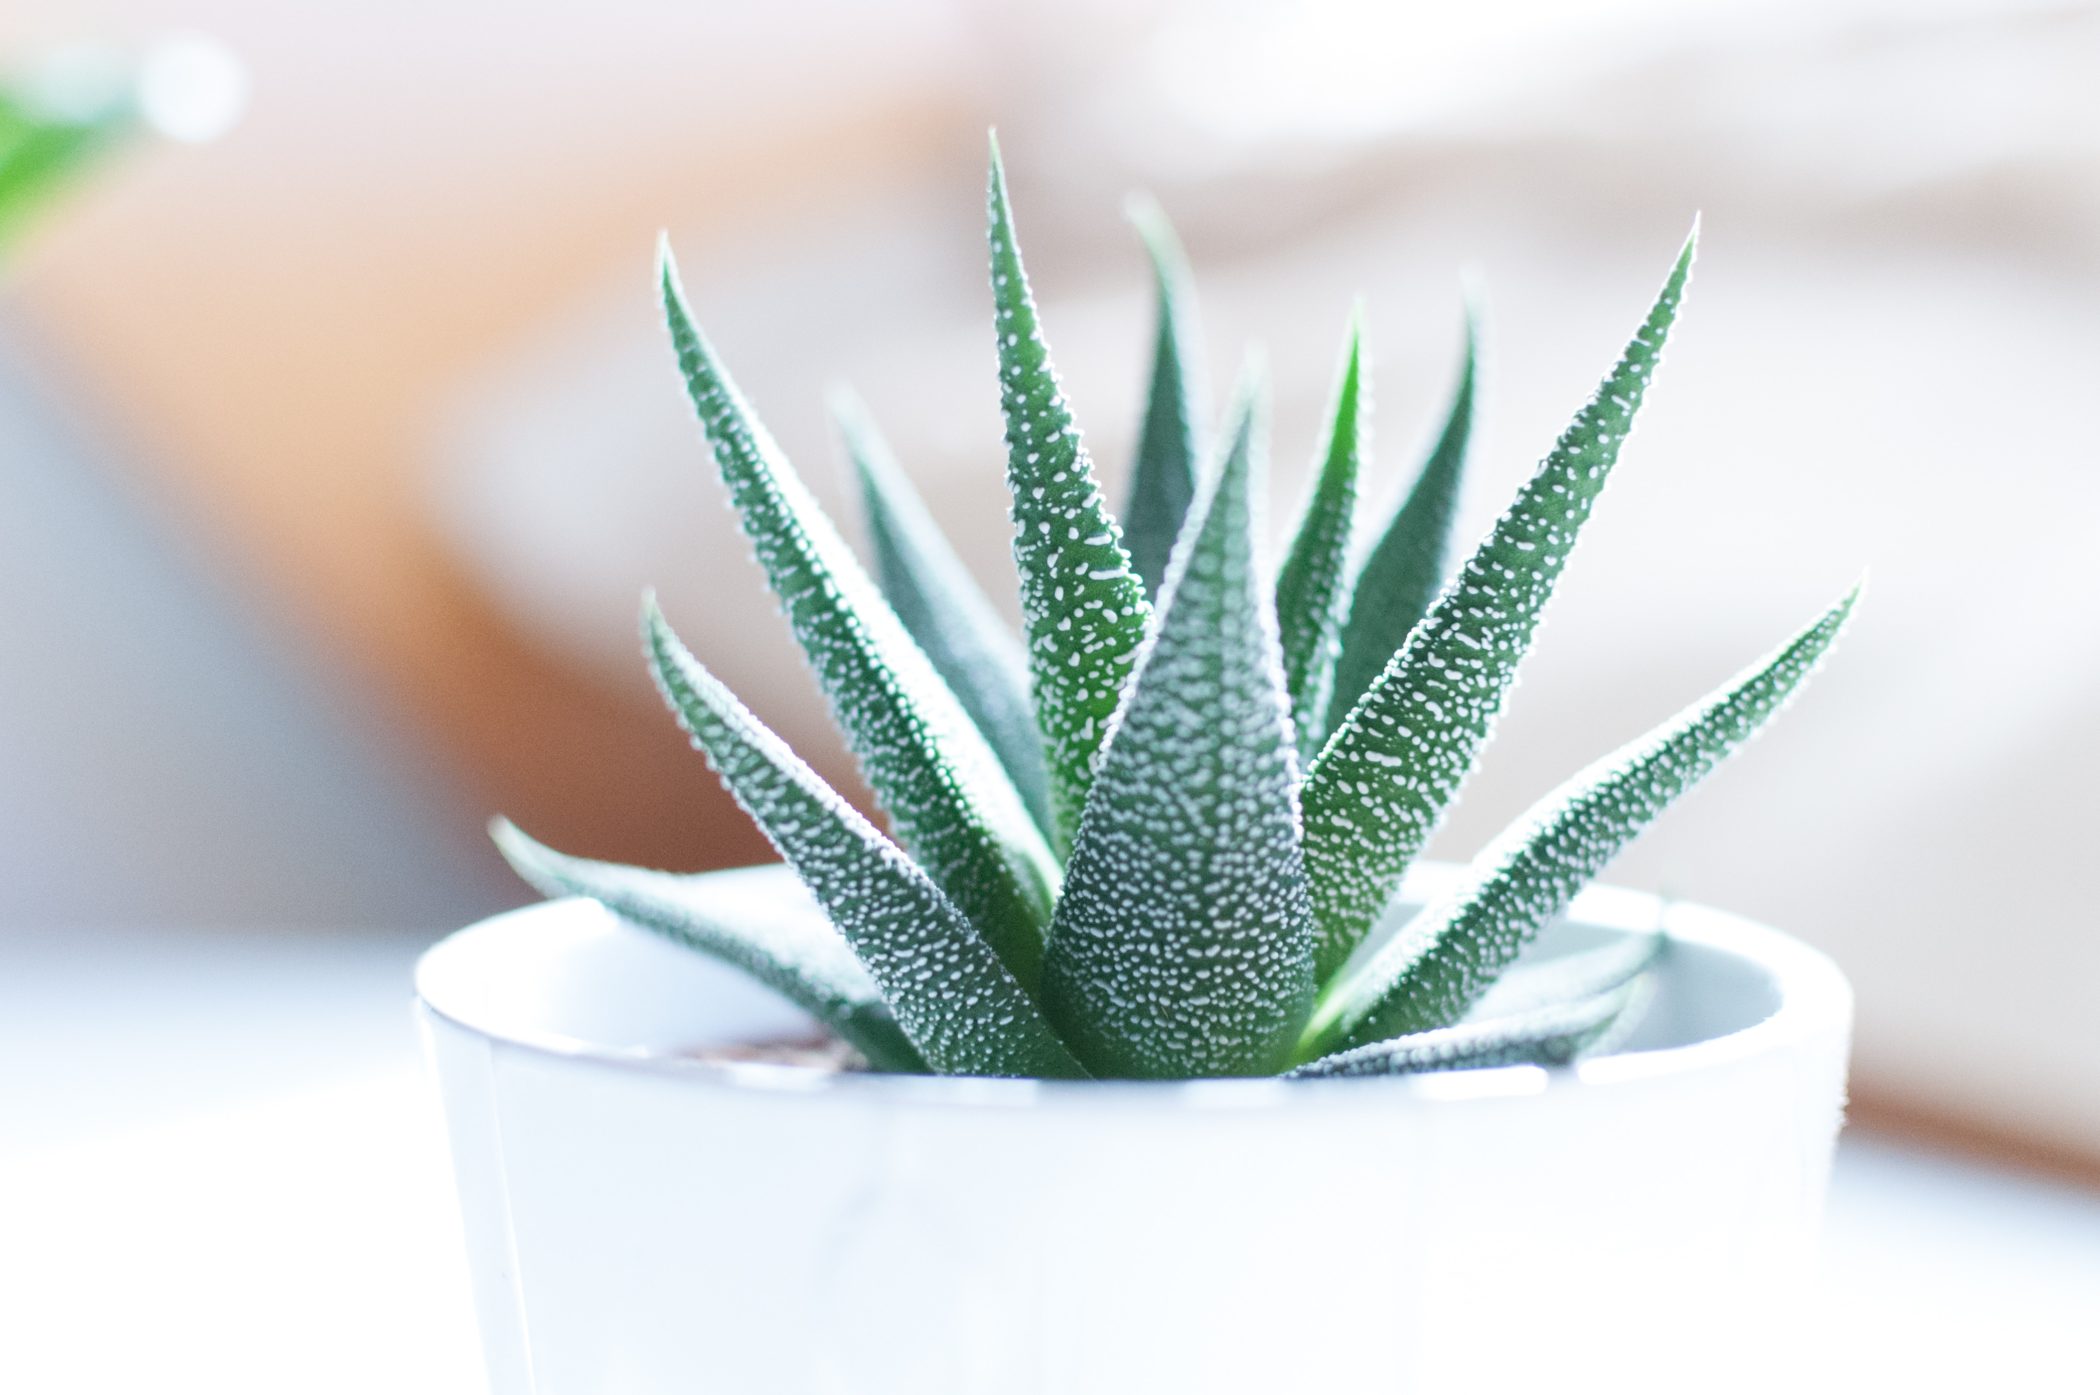 Growing and Caring for Aloe Vera